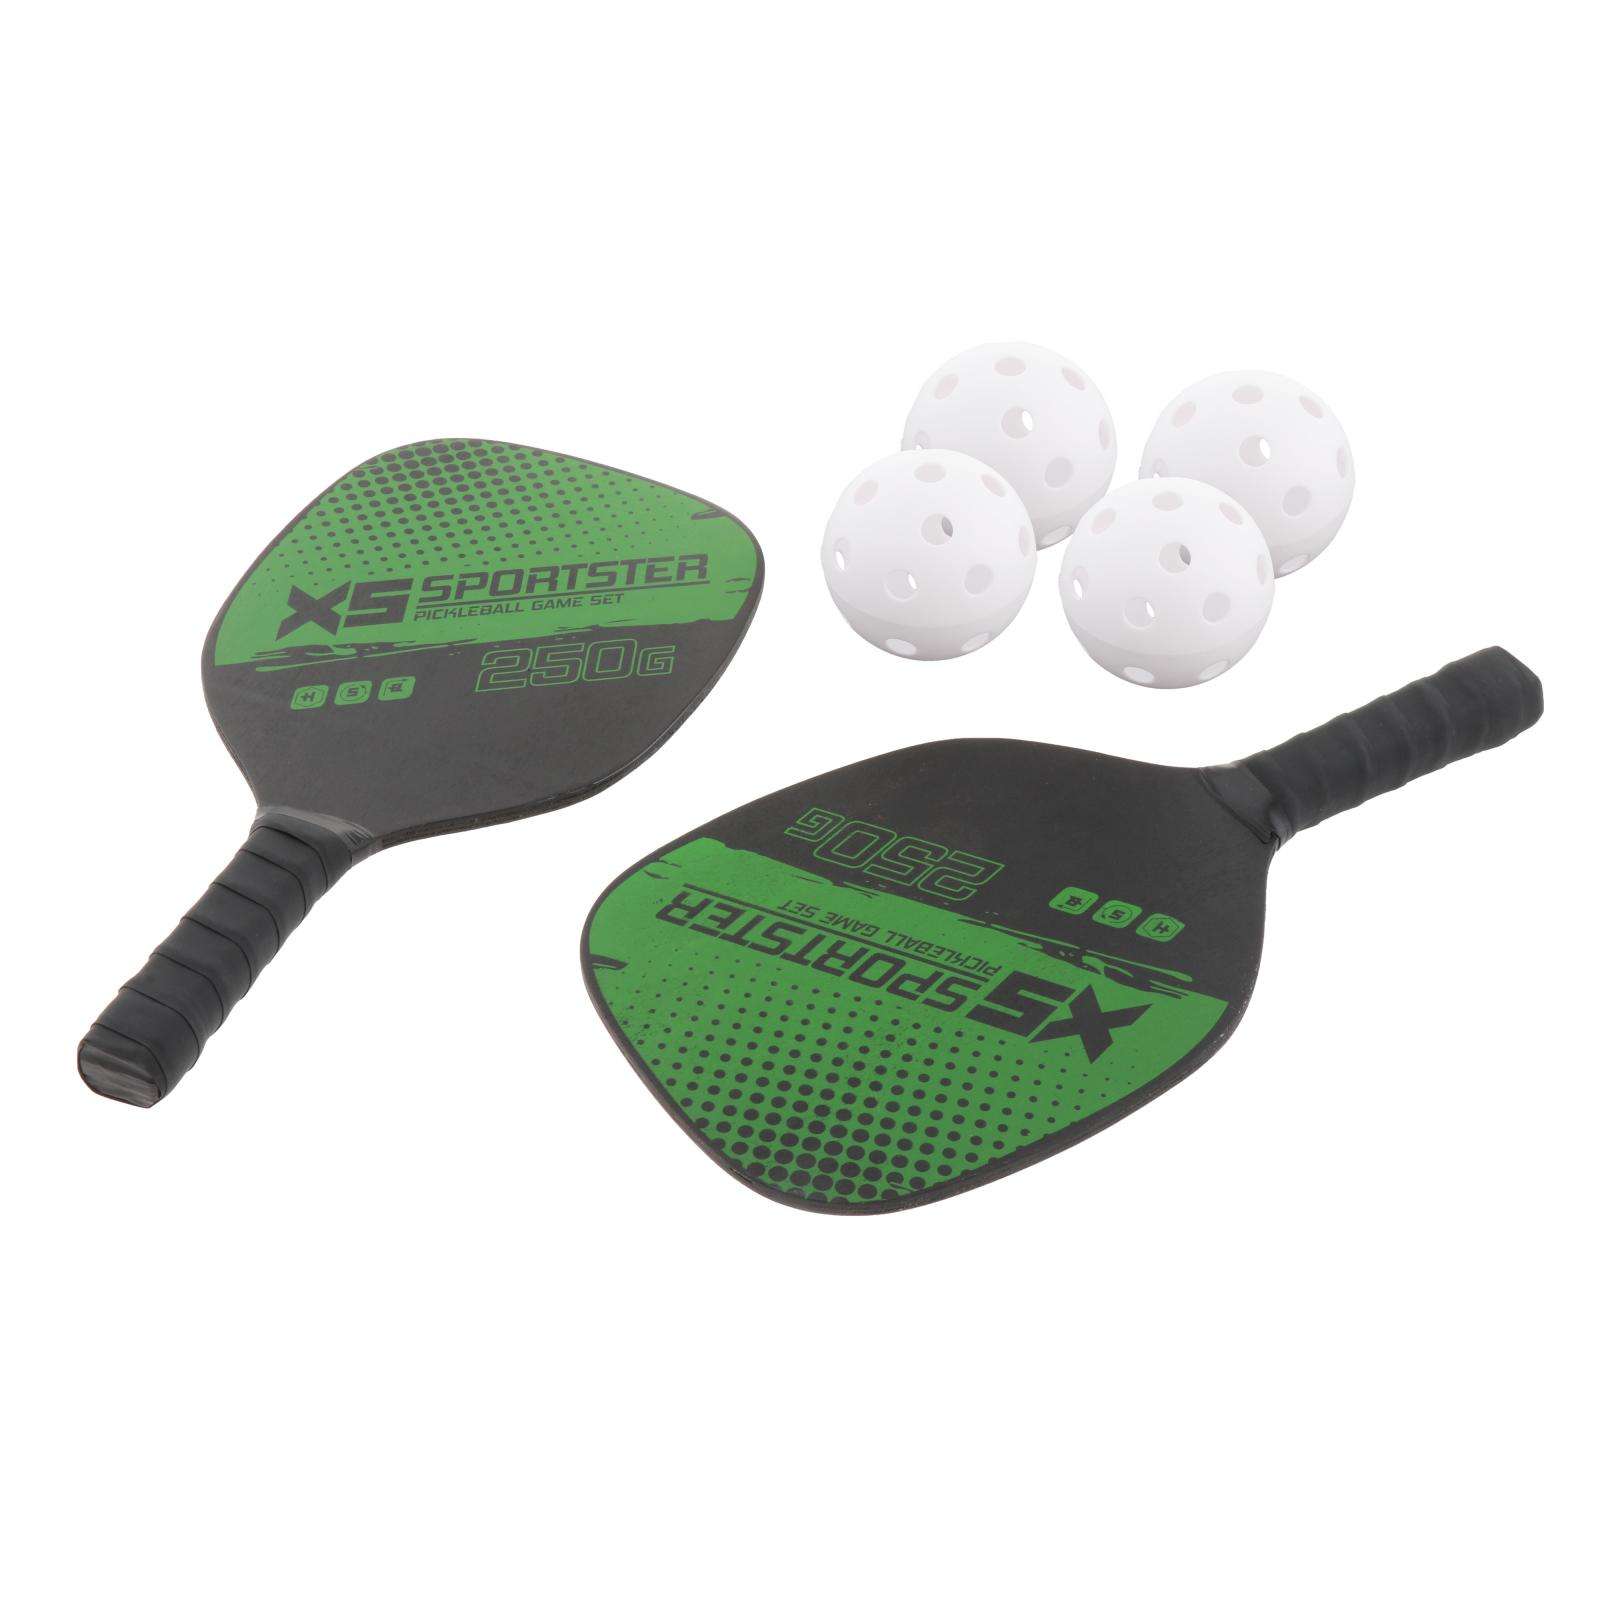 Premium Pickleball Paddles Set with Wood Rackets 4 Balls for Men and Women